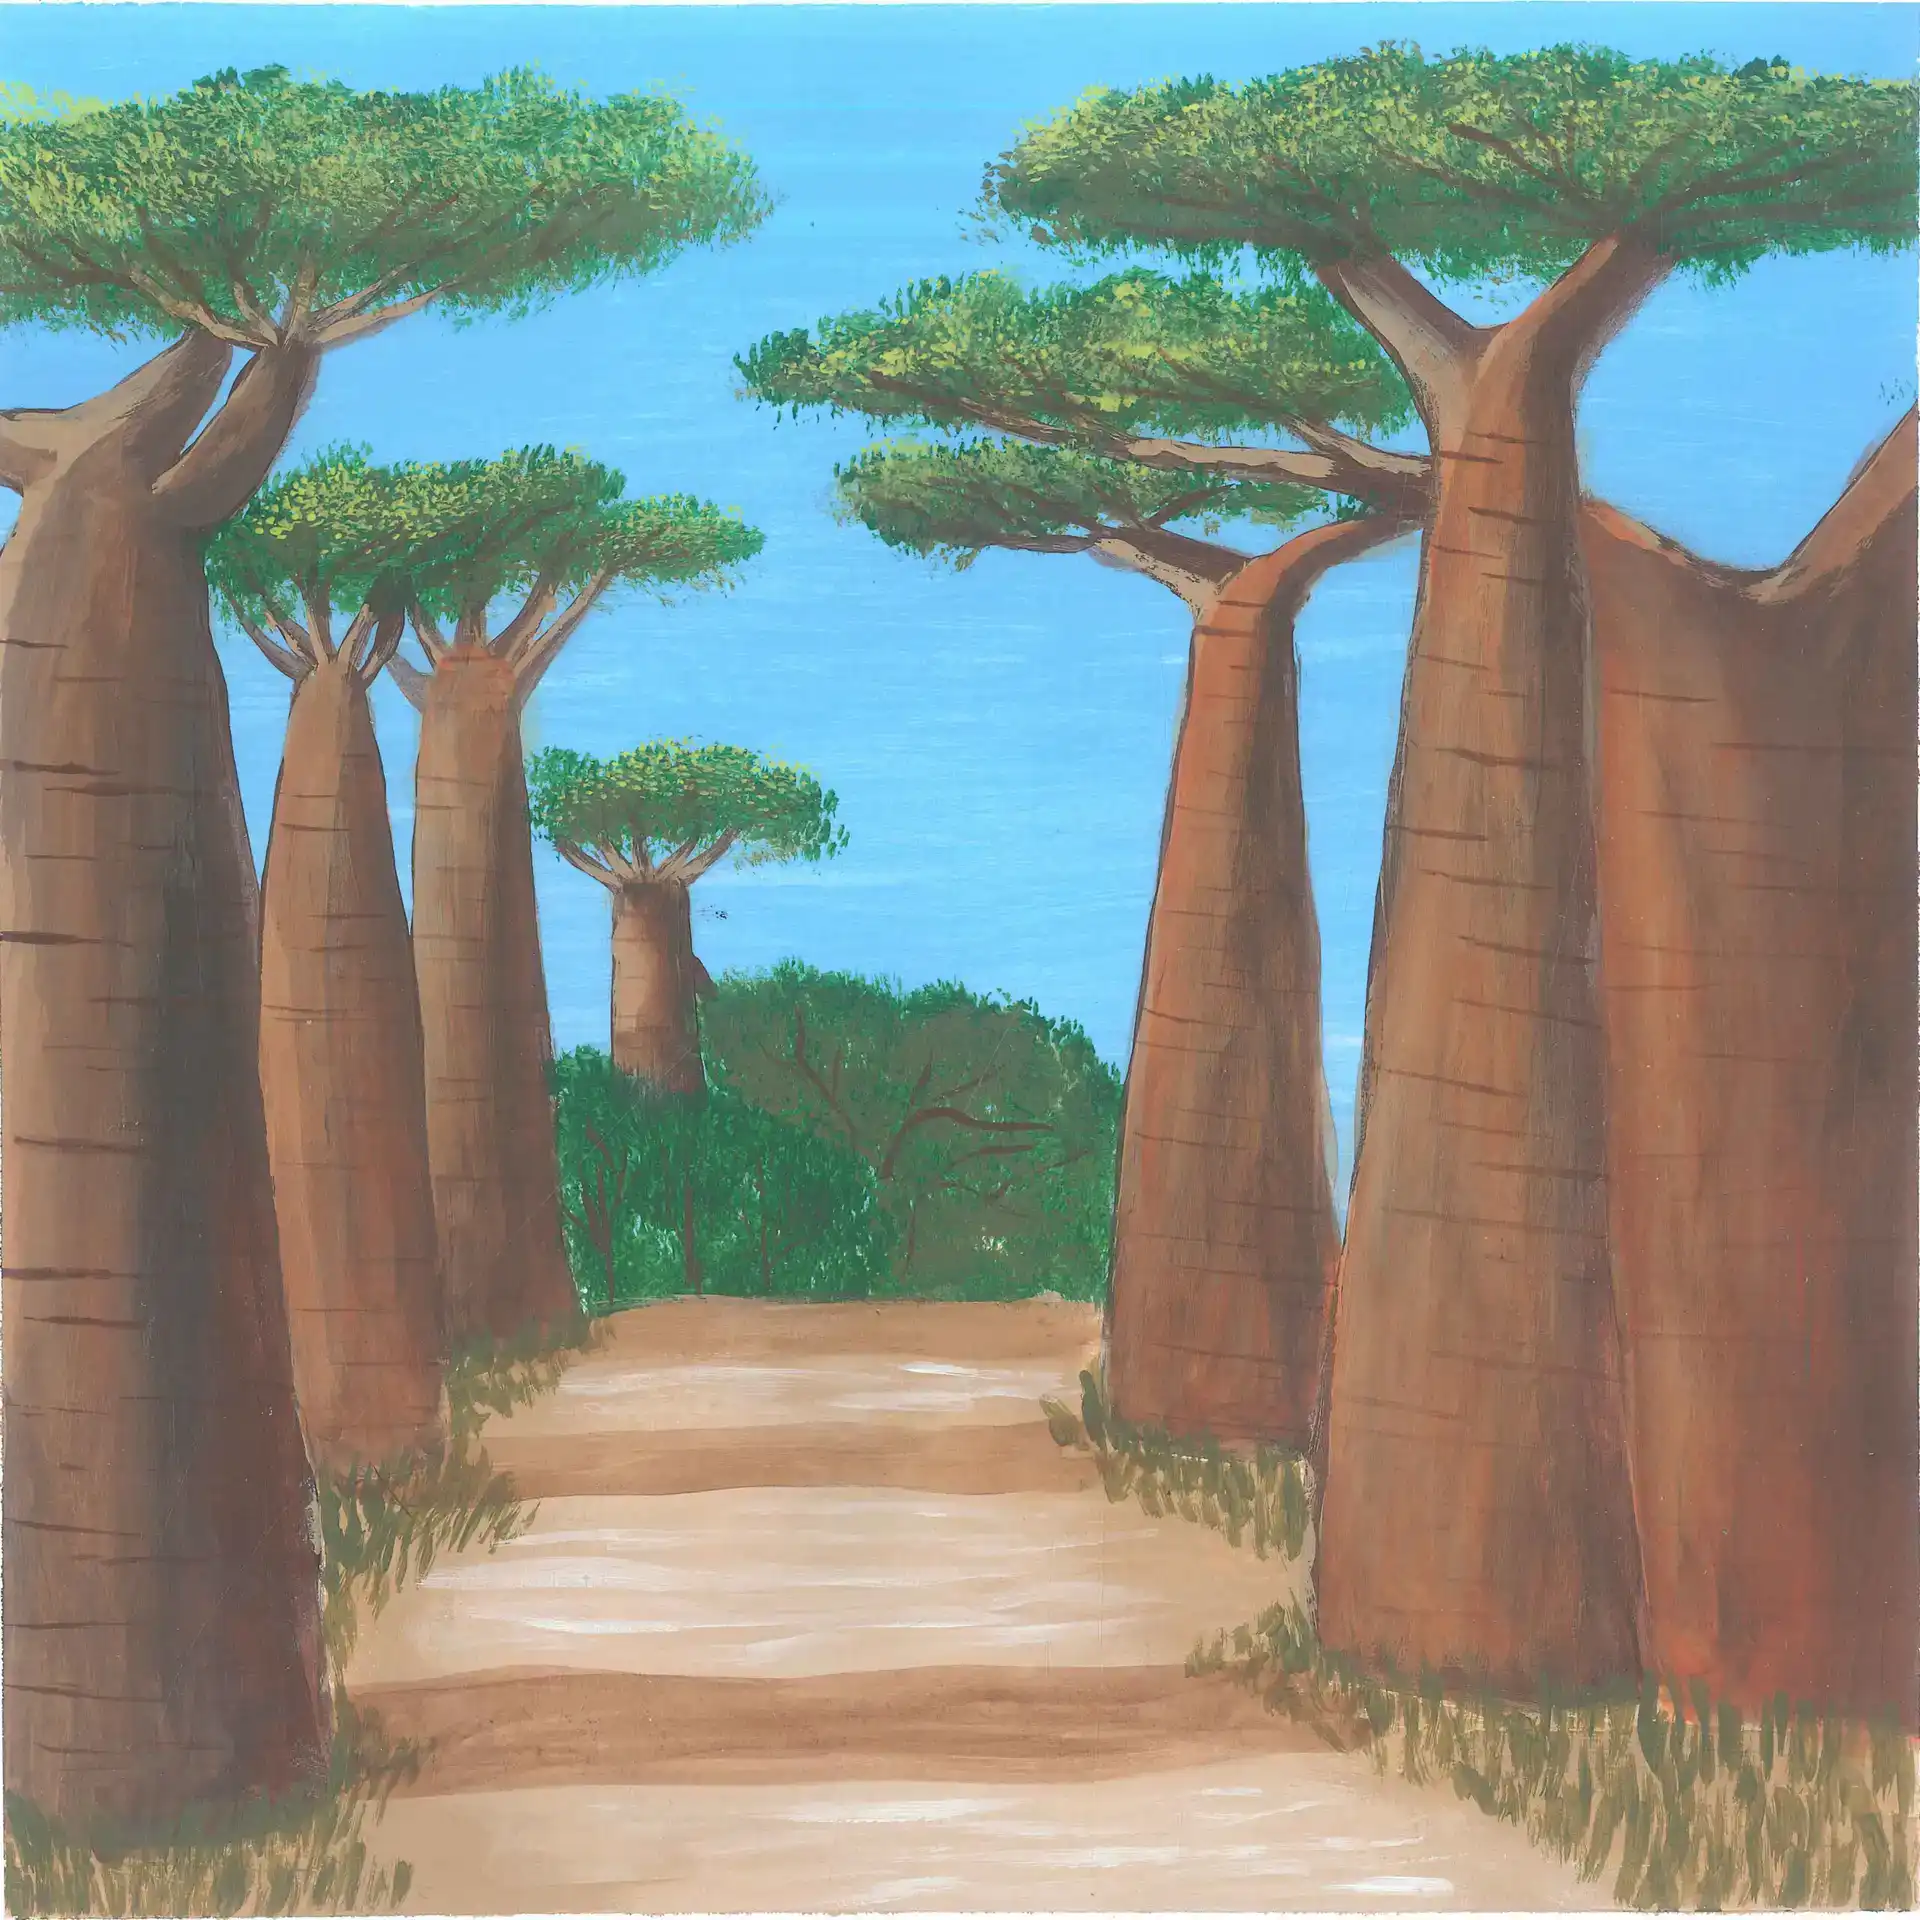 Parakeets Territory Under a Baobab - nature landscape painting - earth.fm